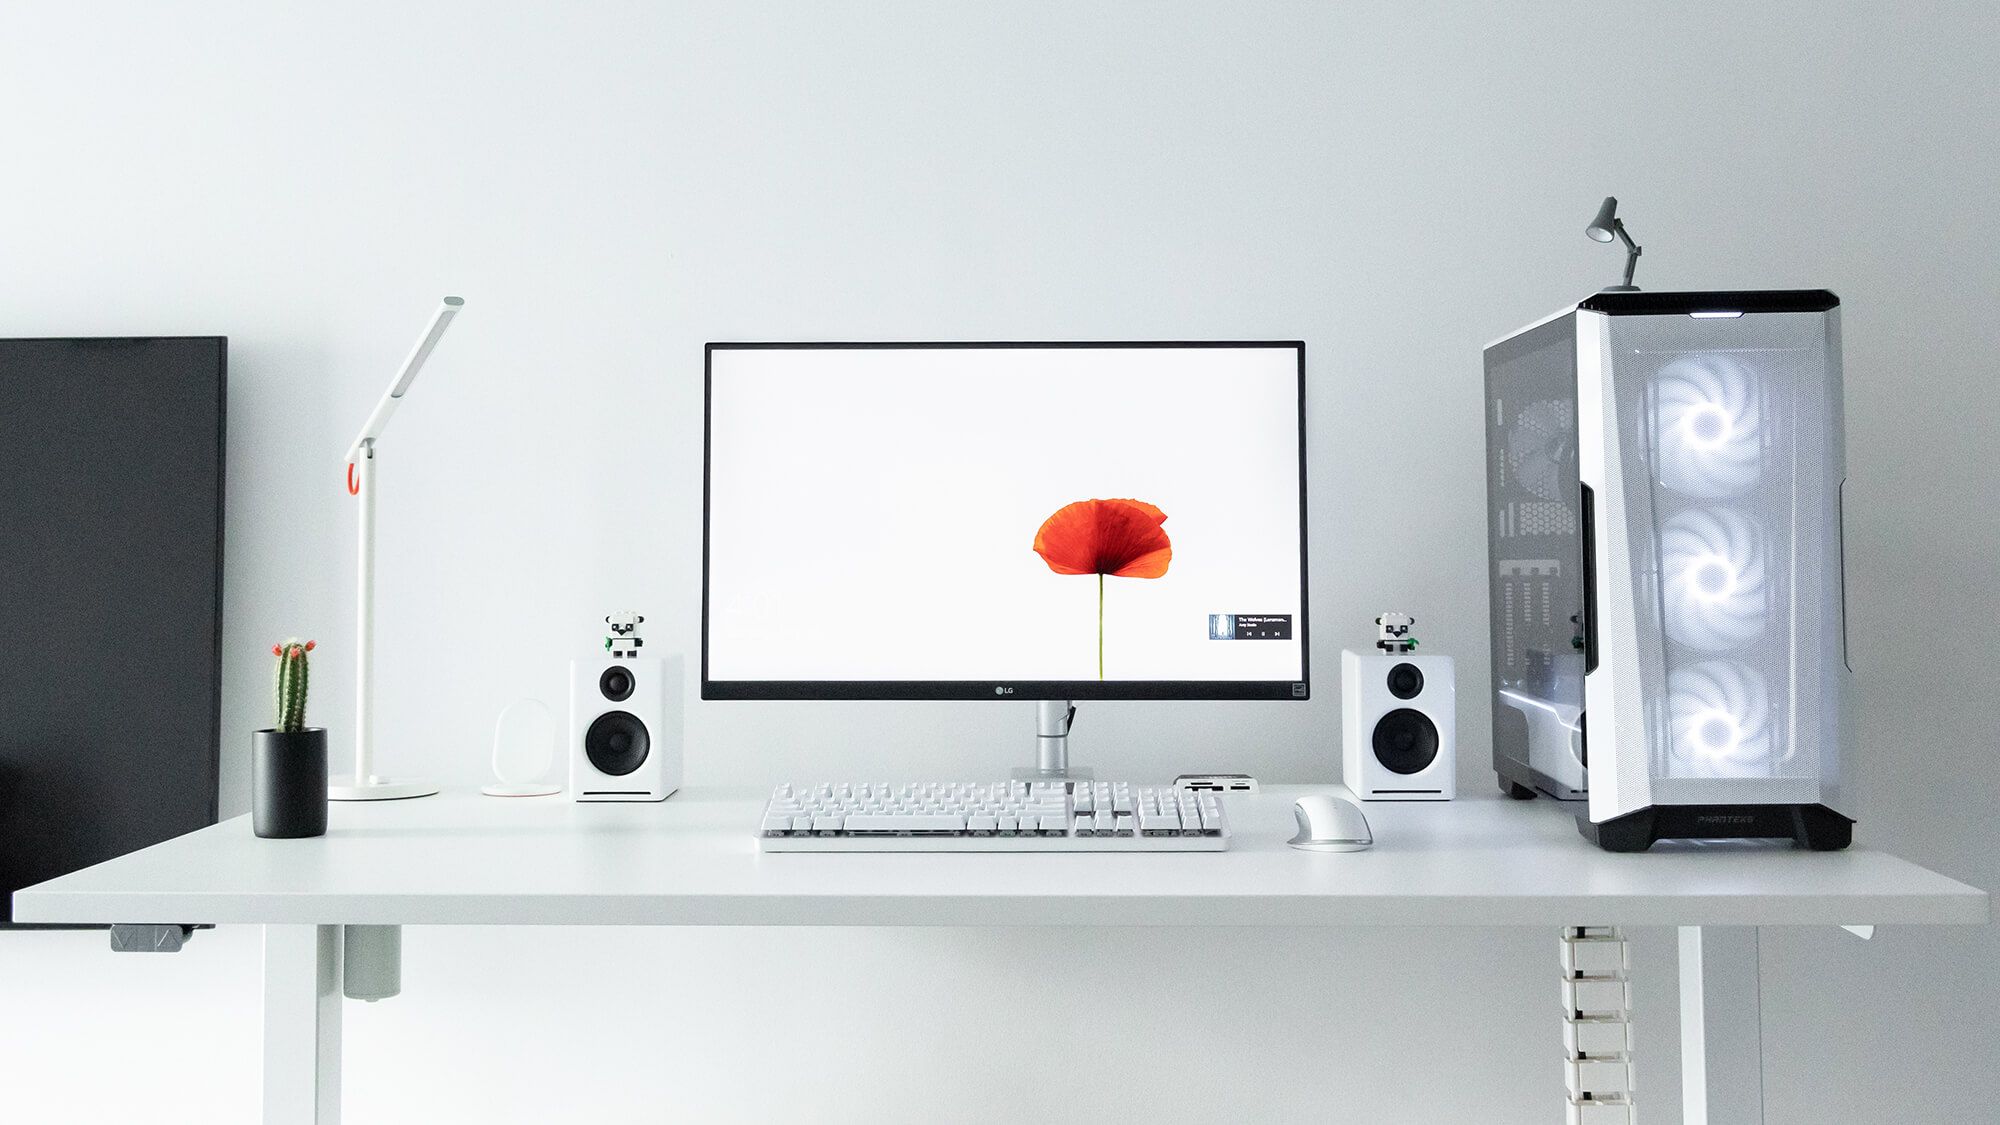 A minimalist cable-free desk setup with a white theme, featuring a sleek monitor with a poppy flower on the screen, a mechanical keyboard, a modern PC case with internal LED fans, stylish desktop speakers, a potted cactus, and a chic desk lamp, all against a clean grey backdrop